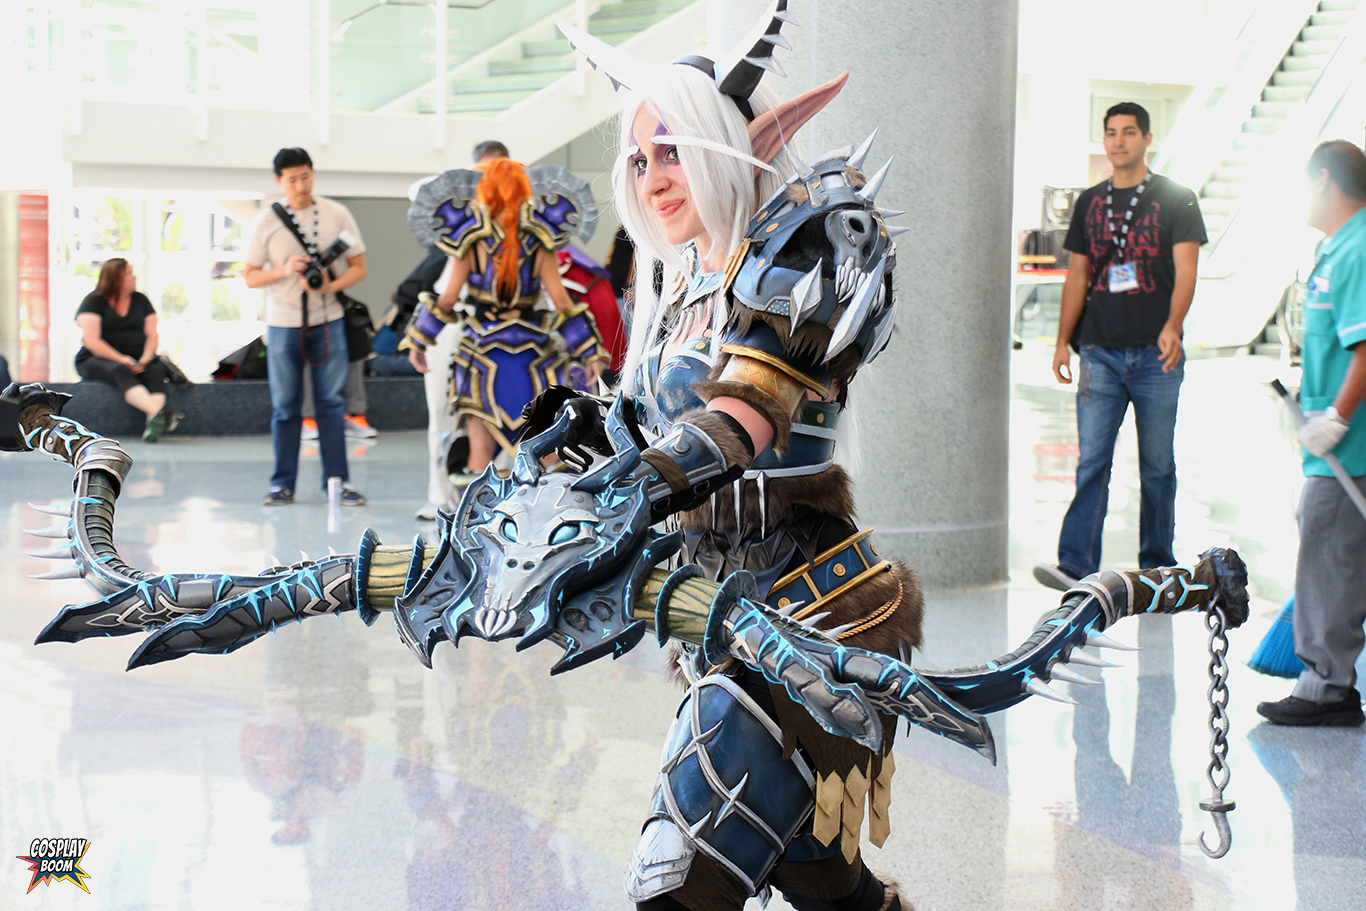 The Coolest Cosplay From Blizzcon 2014